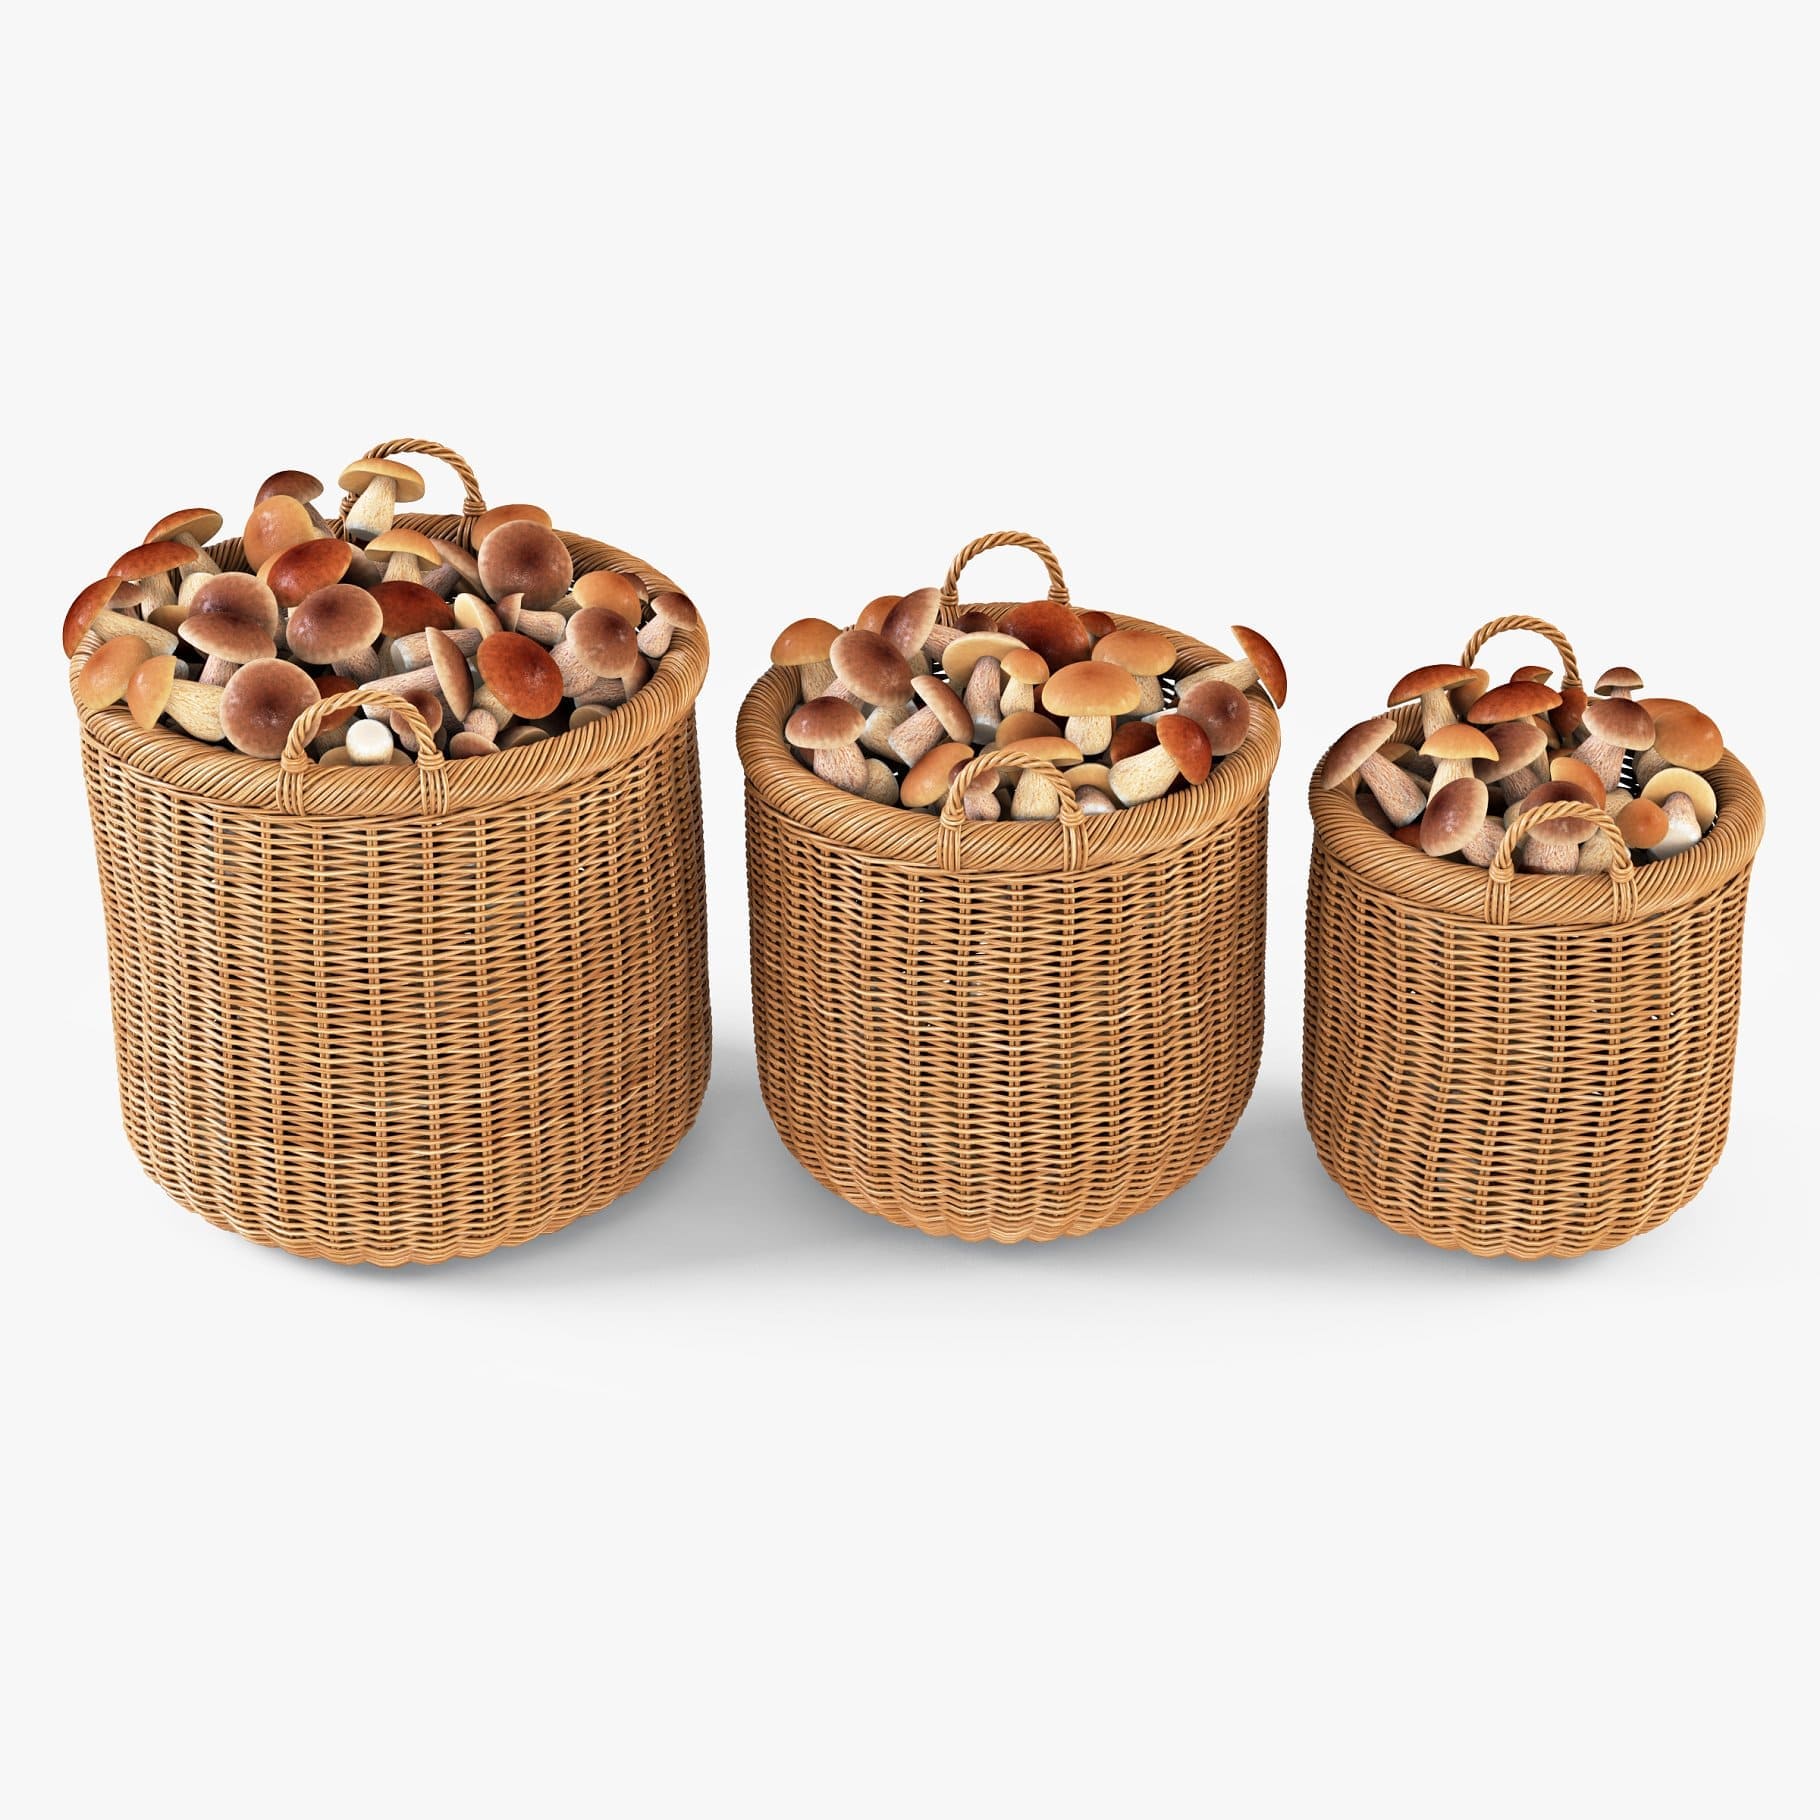 Wicker baskets with handles with small mushrooms in the middle.